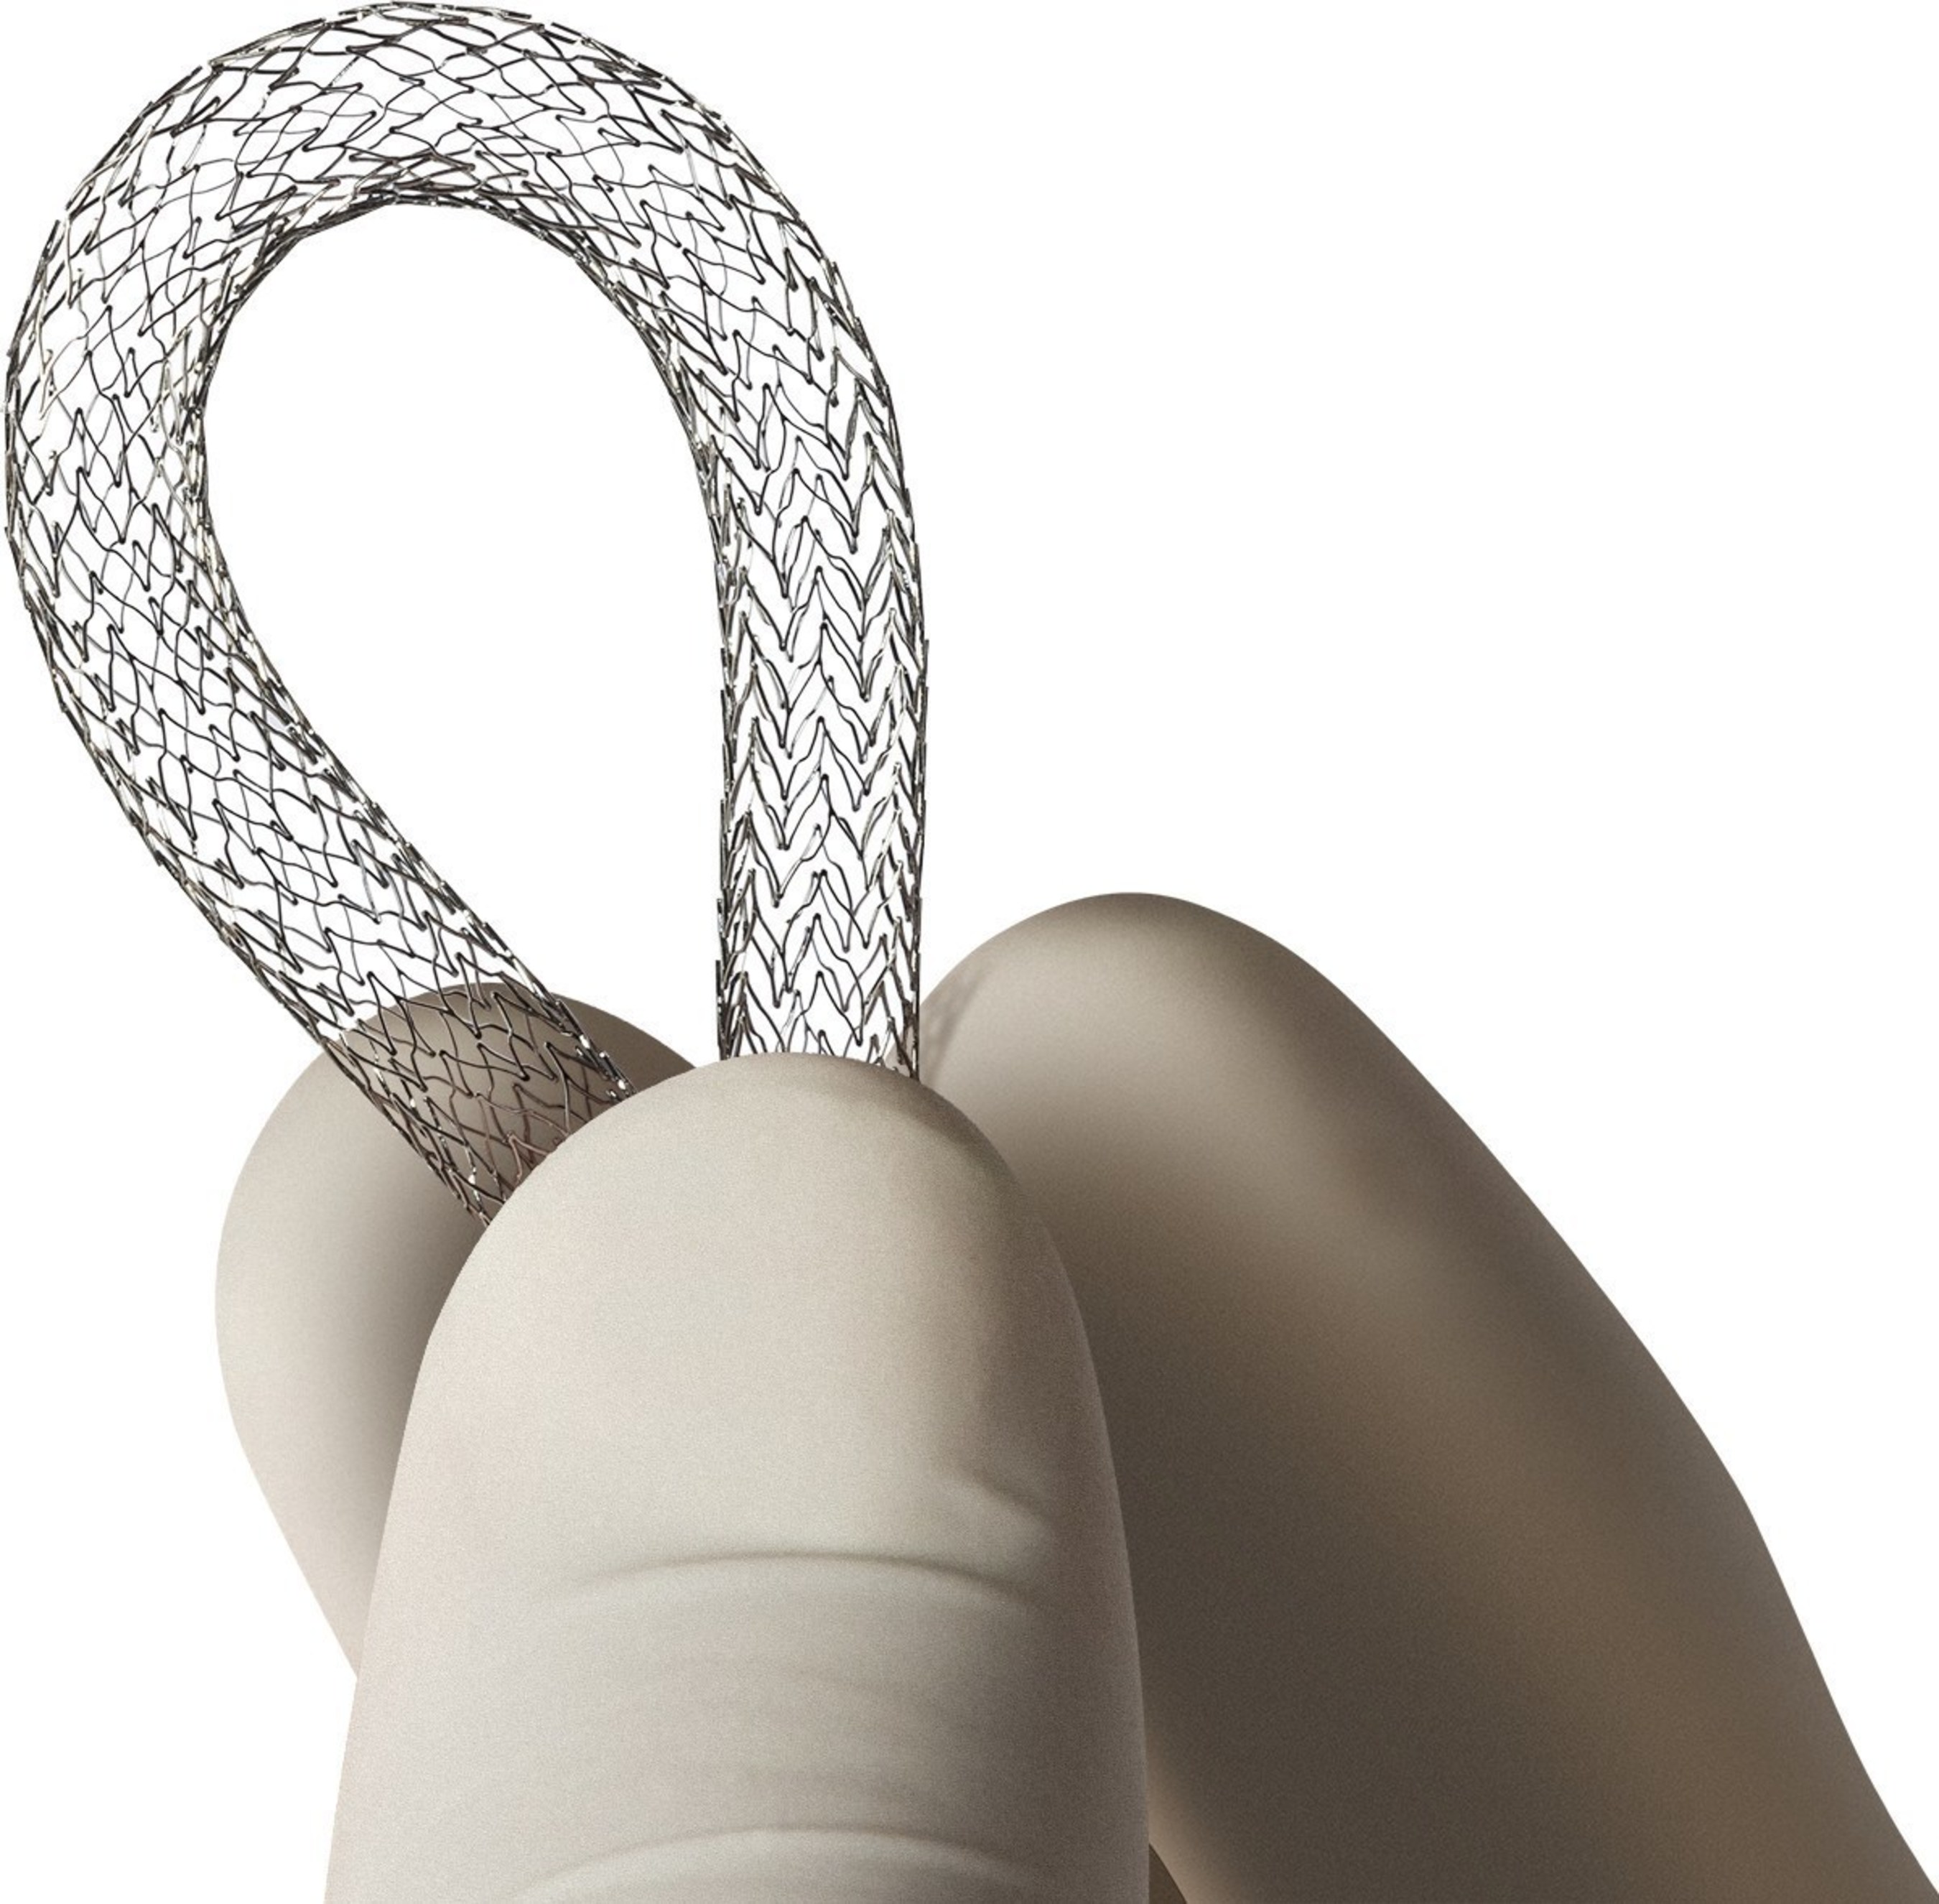 The MISAGO RX Self-expanding Peripheral Stent